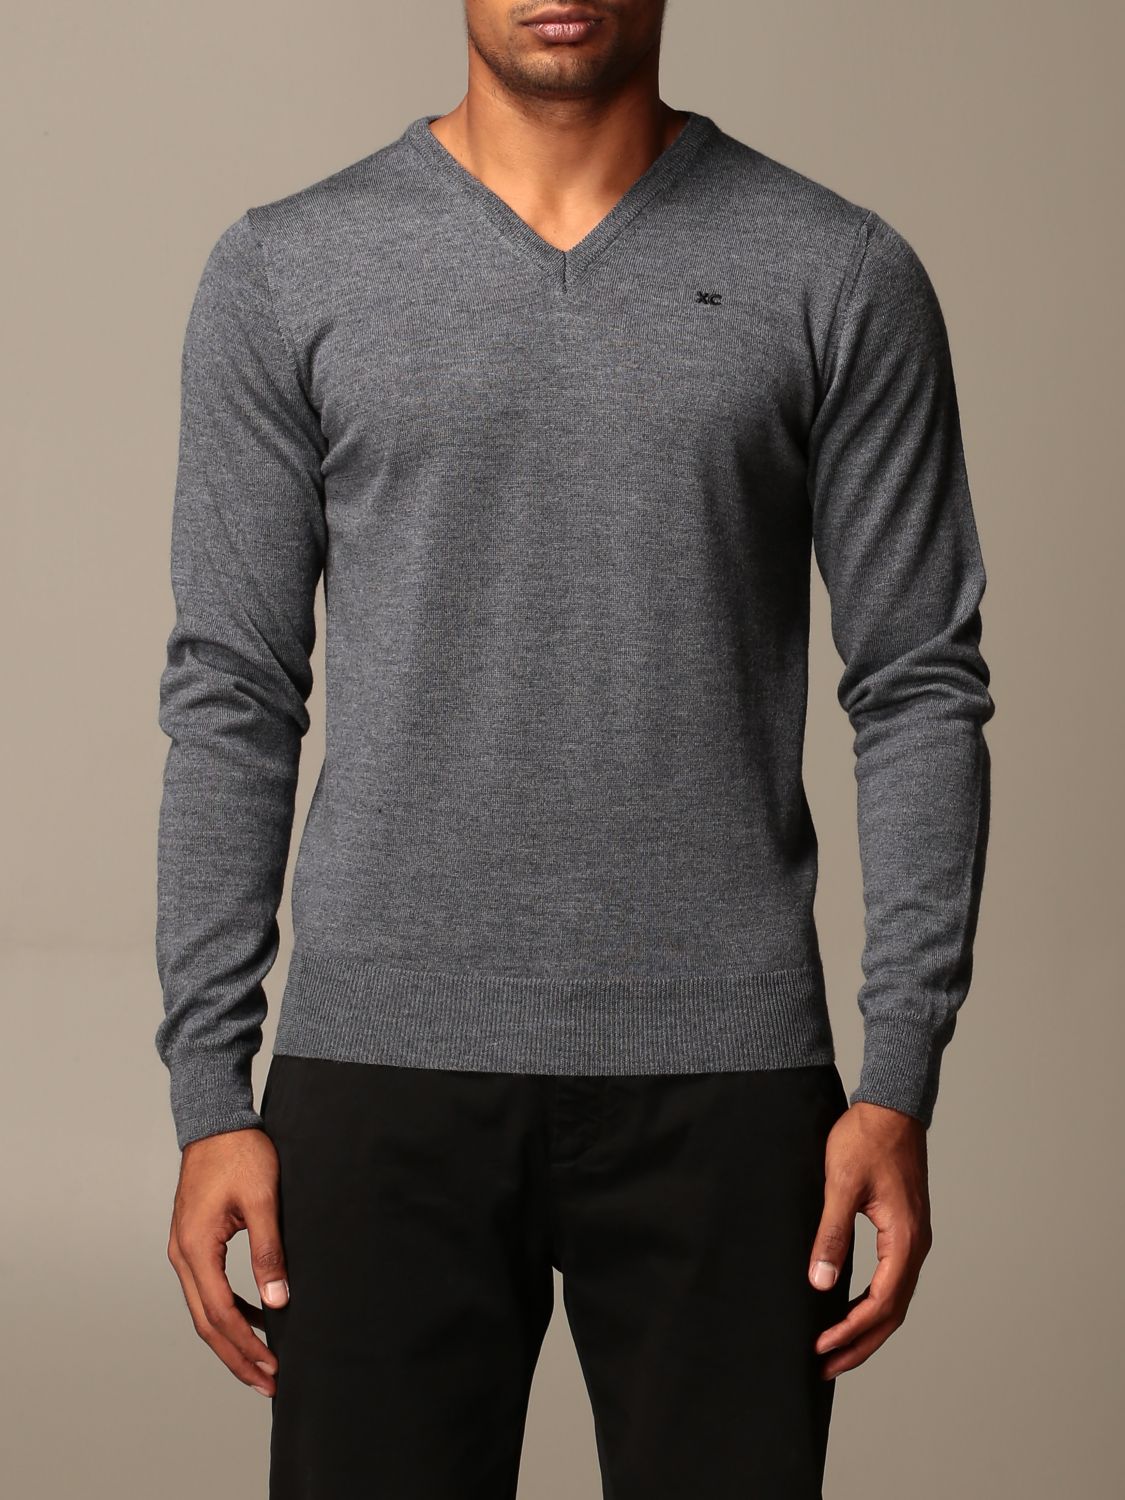 Xc Outlet: V-neck sweater in extrafine Merino wool - Charcoal | Sweater ...